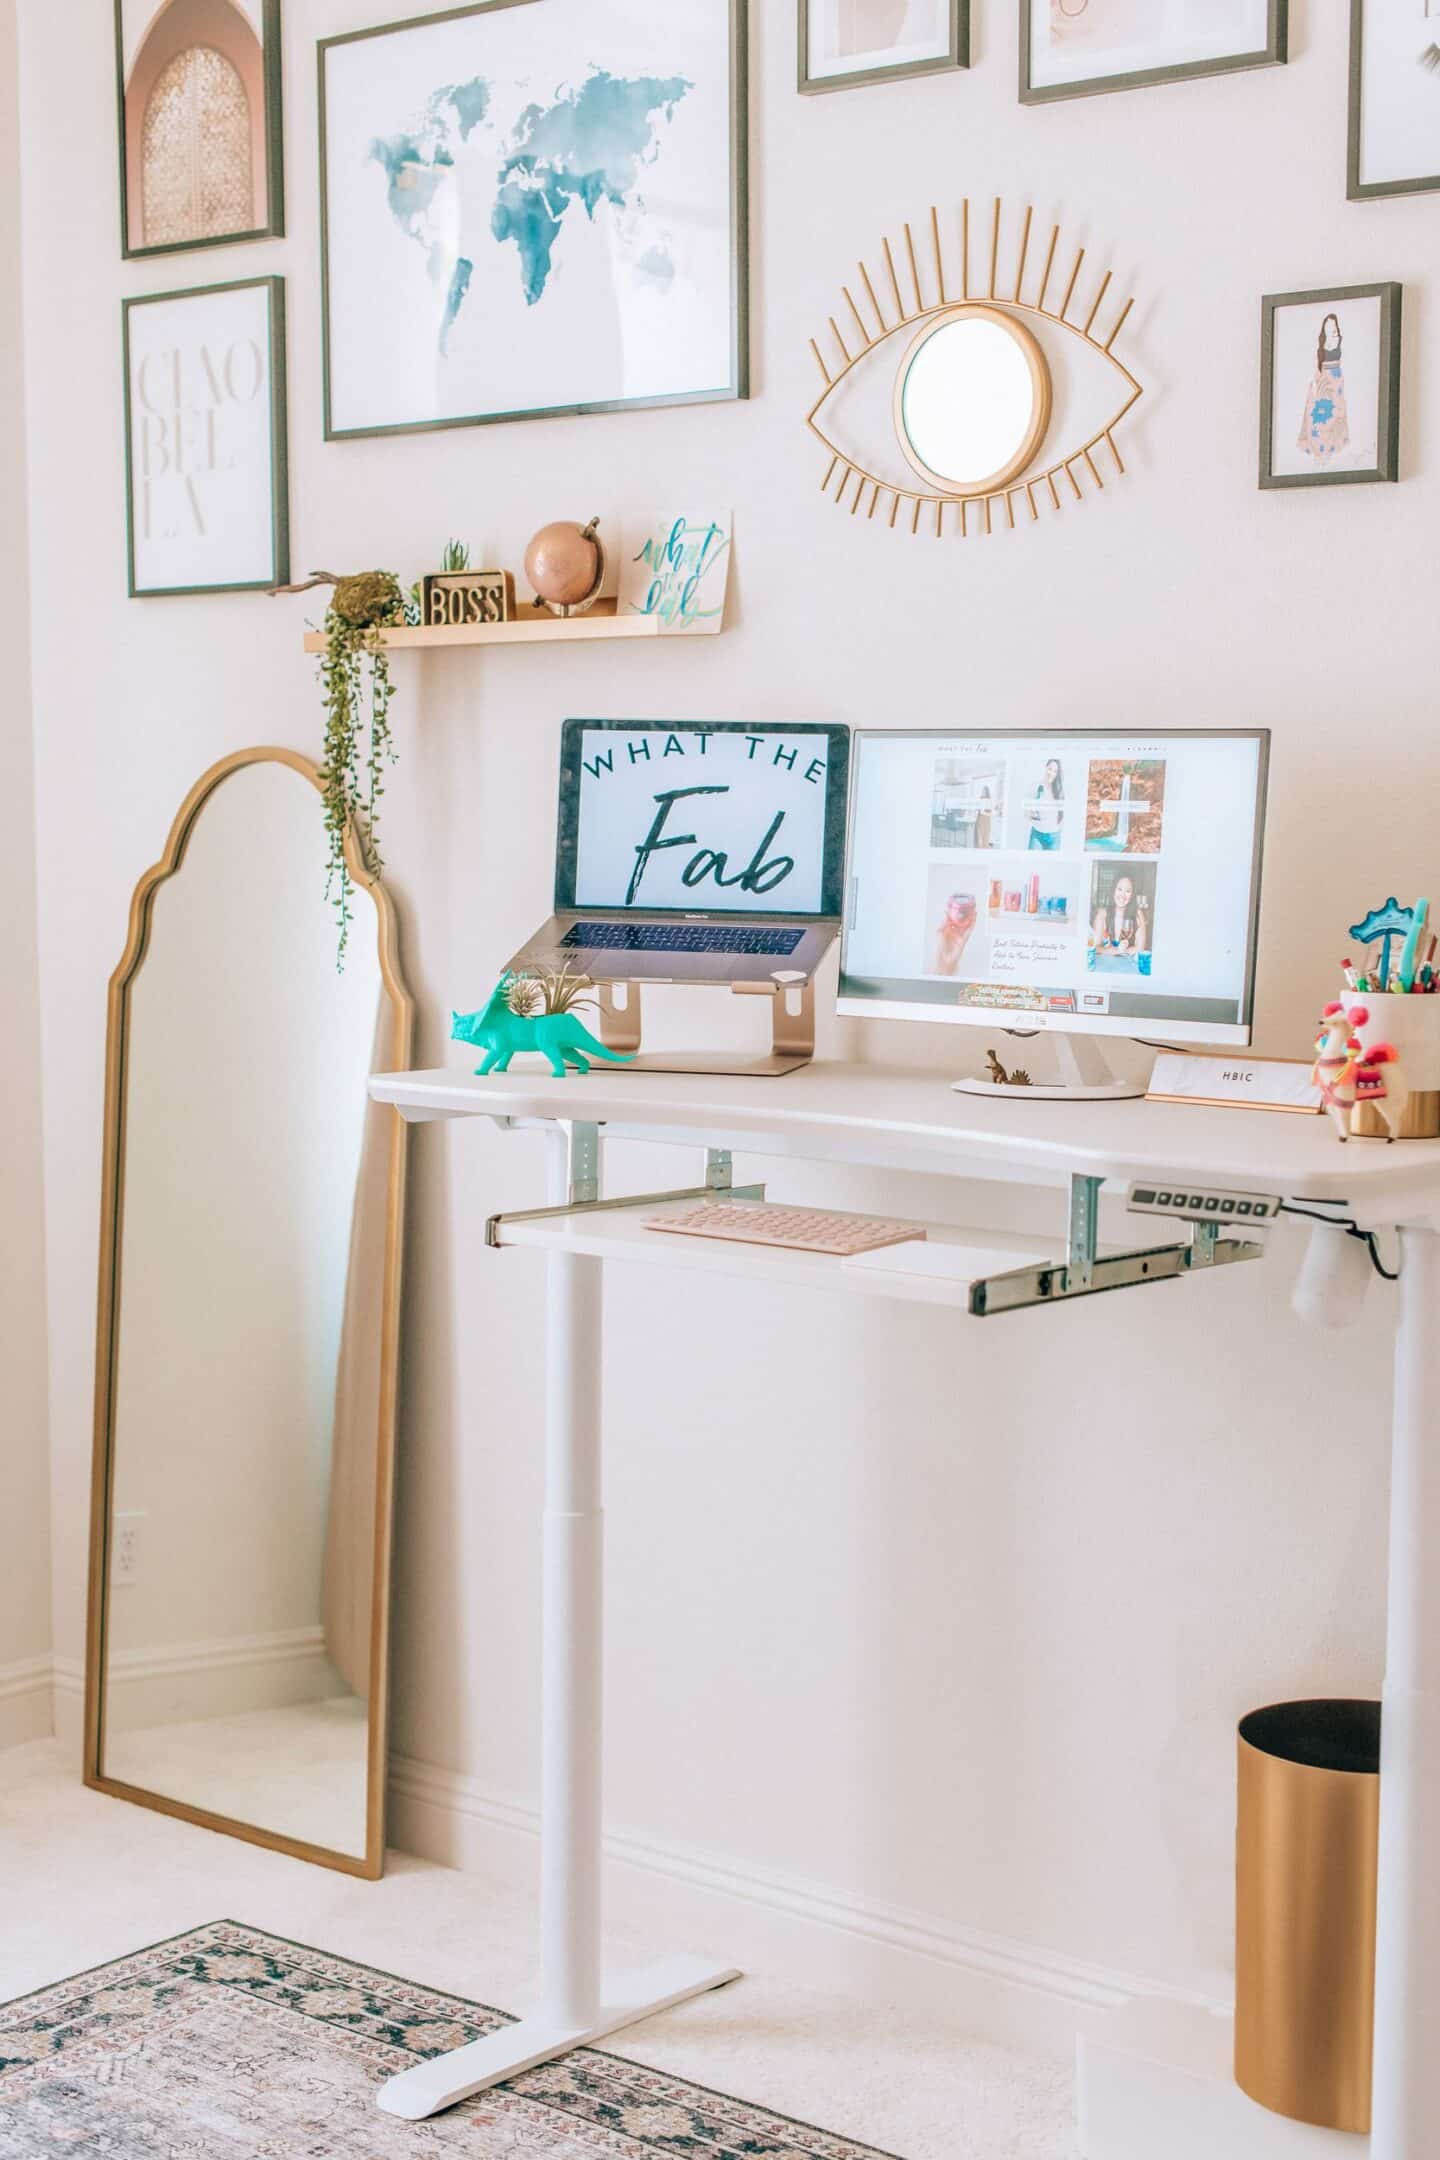 Brass Mirror, by Blogger What The Fab